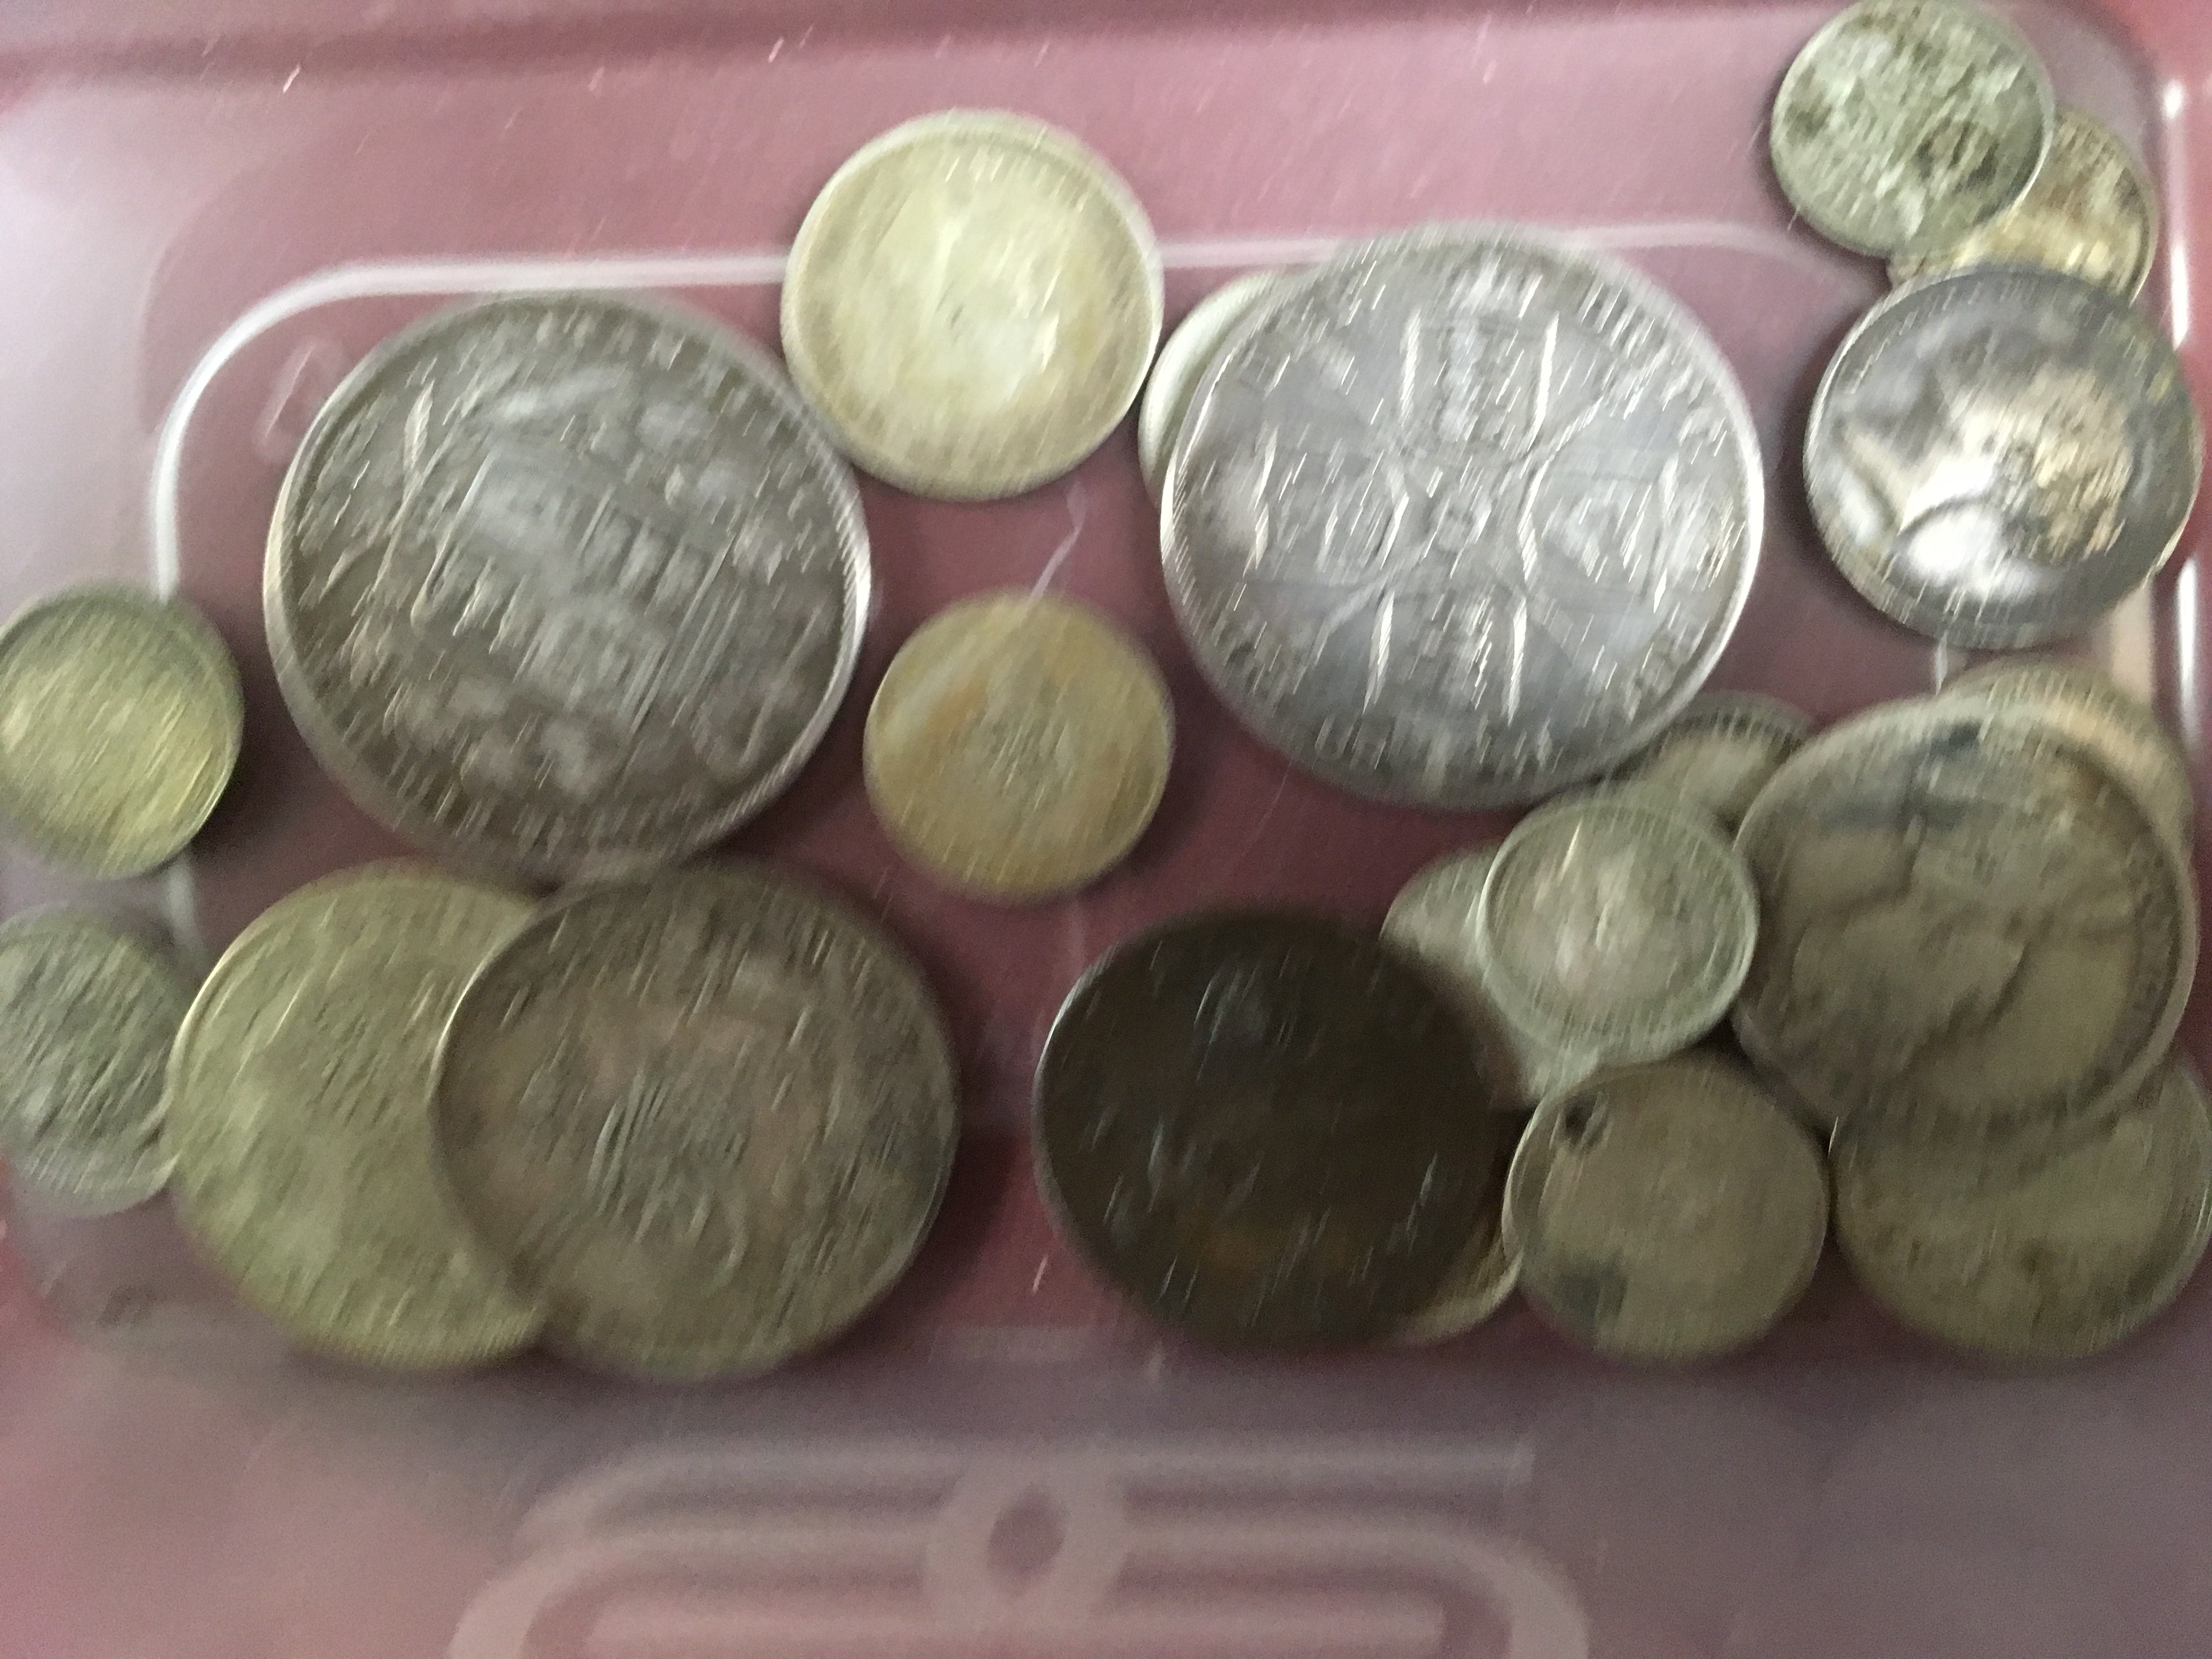 TUB MIXED UK AND OVERSEAS COINS, FEW SILVER INCLUDING 1844 CROWN, 1889 DOUBLE FLORIN ETC. - Image 2 of 4